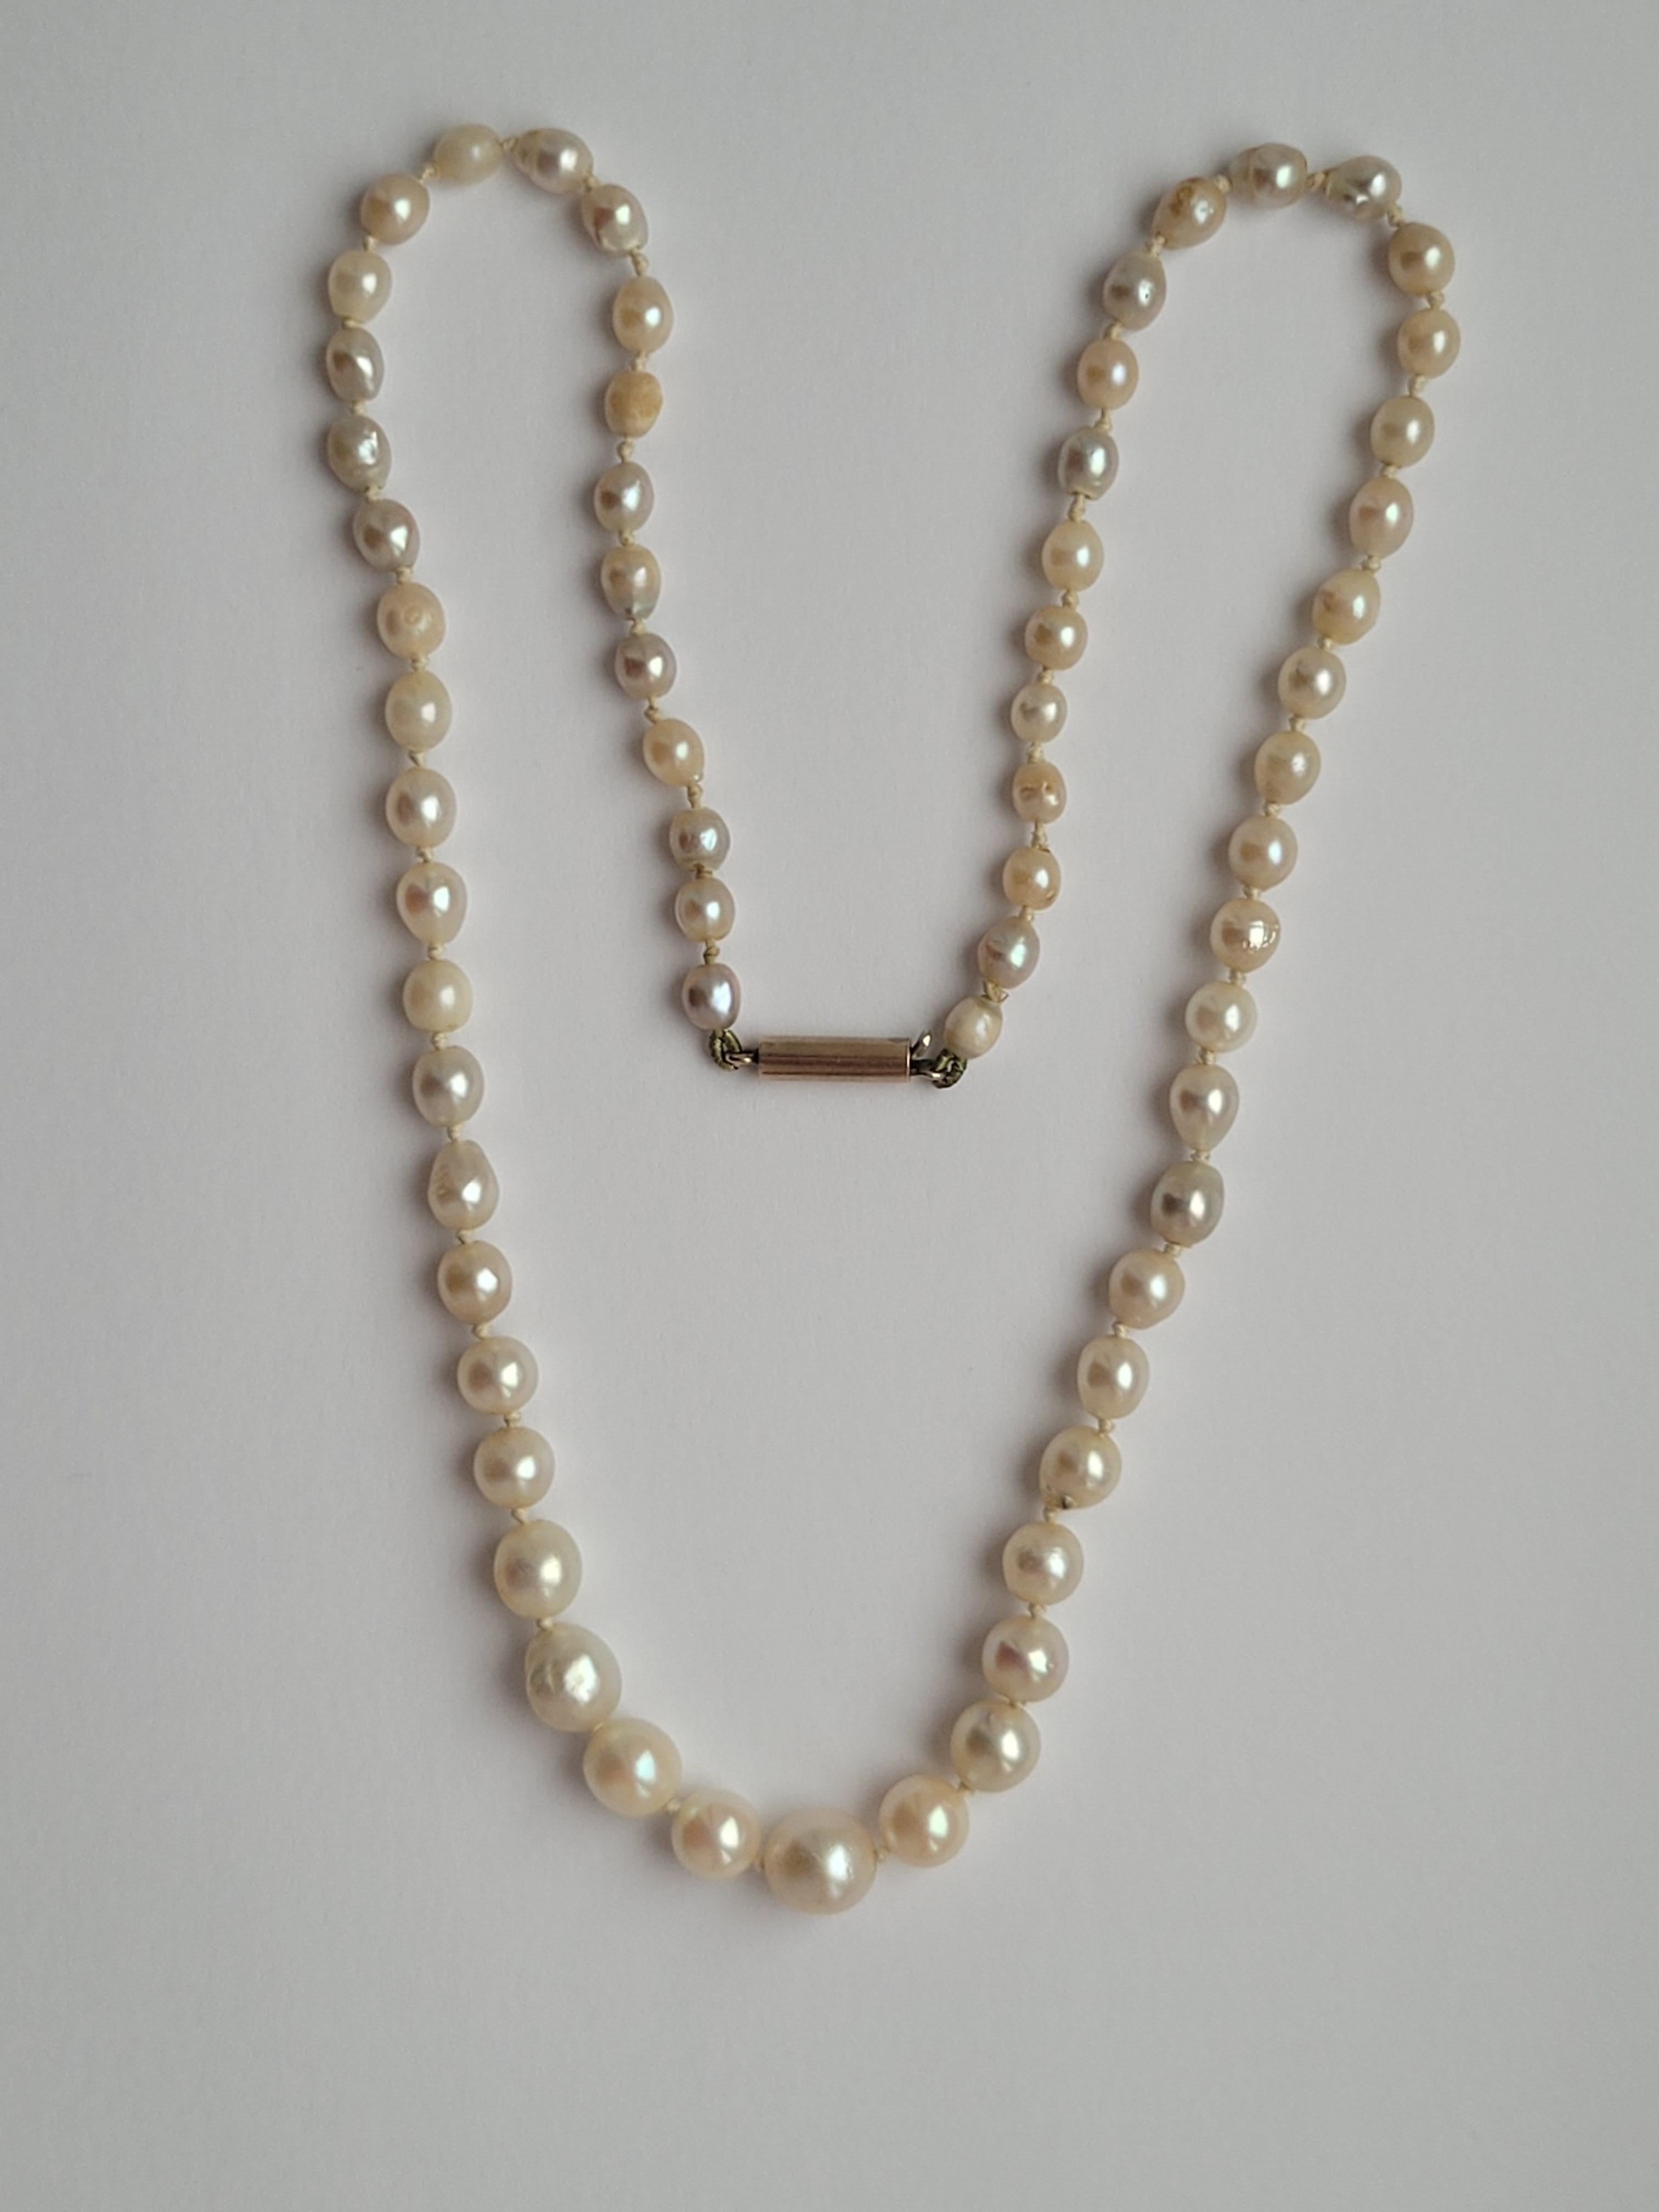 An Antique early 1900s Cultured Pearl necklace with a gold barrel clasp. The luster of the pearls varies from cream to grey. English origin.
Pearls from 4mm to 7mm.
Total length including clasp 17